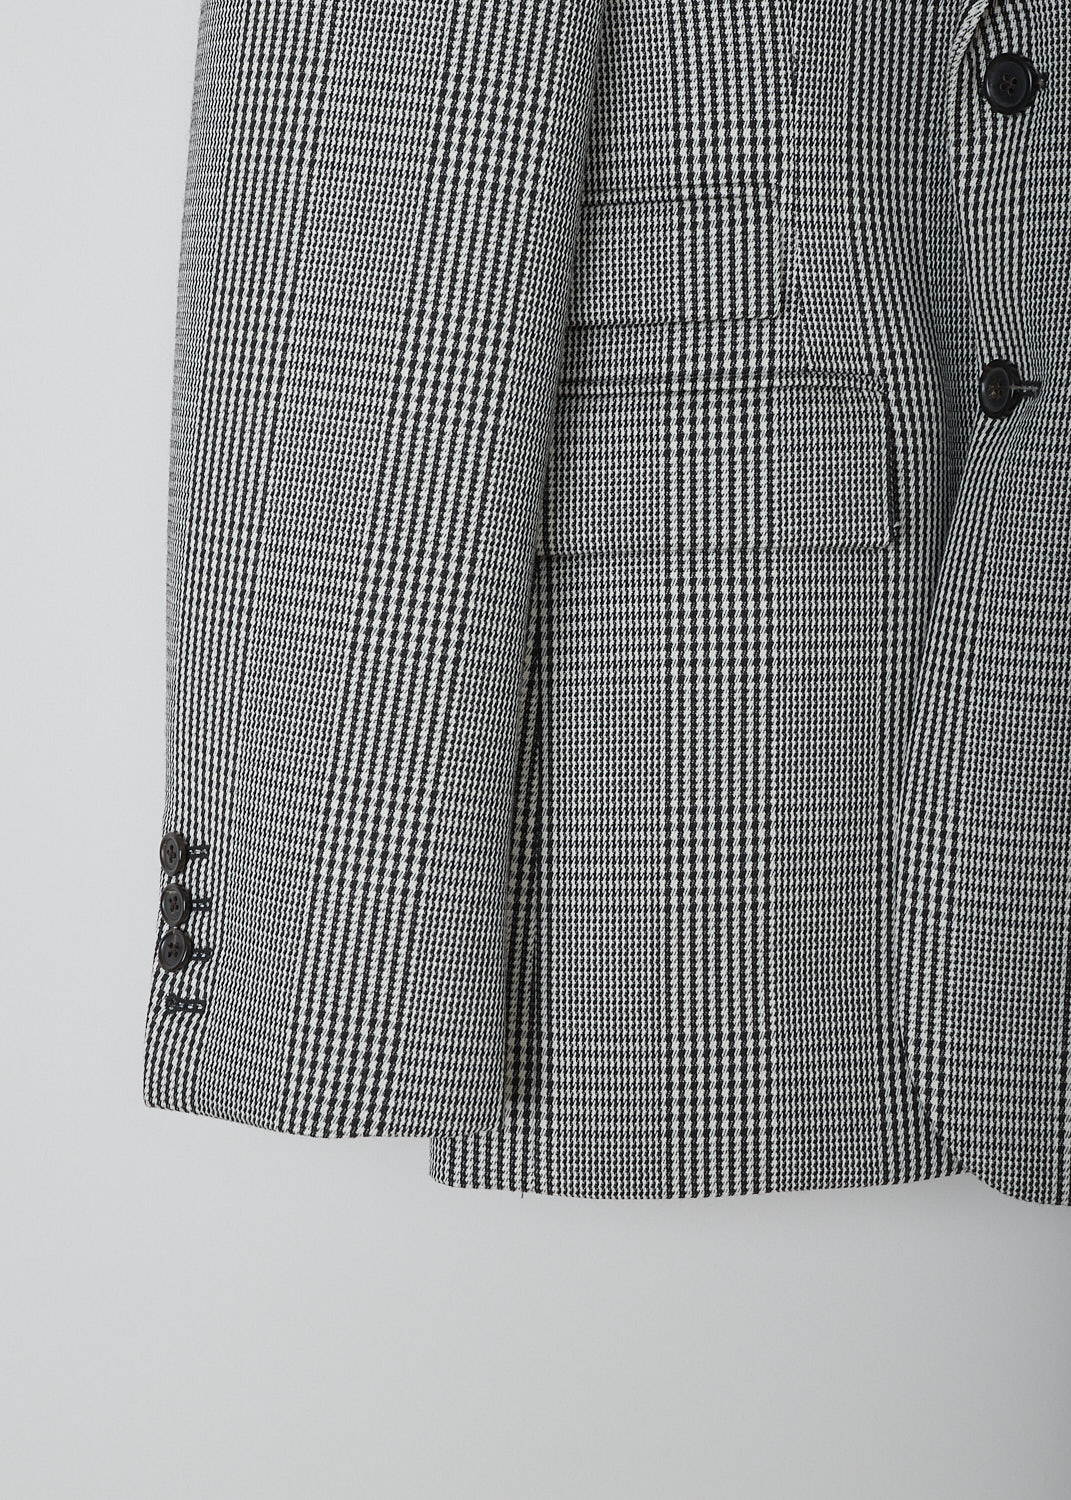 THOM BROWNE, BLACK AND WHITE PRINCE DE GALLES CHECK SPORT JACKET, FBC681A_06298_980, Black, White, Print, Detail, This single-breasted sport jacket has a black and white prince de galles check motif. The jacket has a notched lapel, a front button closure and a nipped waist. The long sleeves have buttoned cuffs. In the front, the jacket has a single breast pocket and two flap welt pockets. On the inside, the jacket has a striped lining, three inner pockets and a name tag. The brand's signature grosgrain loop tab can be found in the back. The jacket has a double vent. 
  
